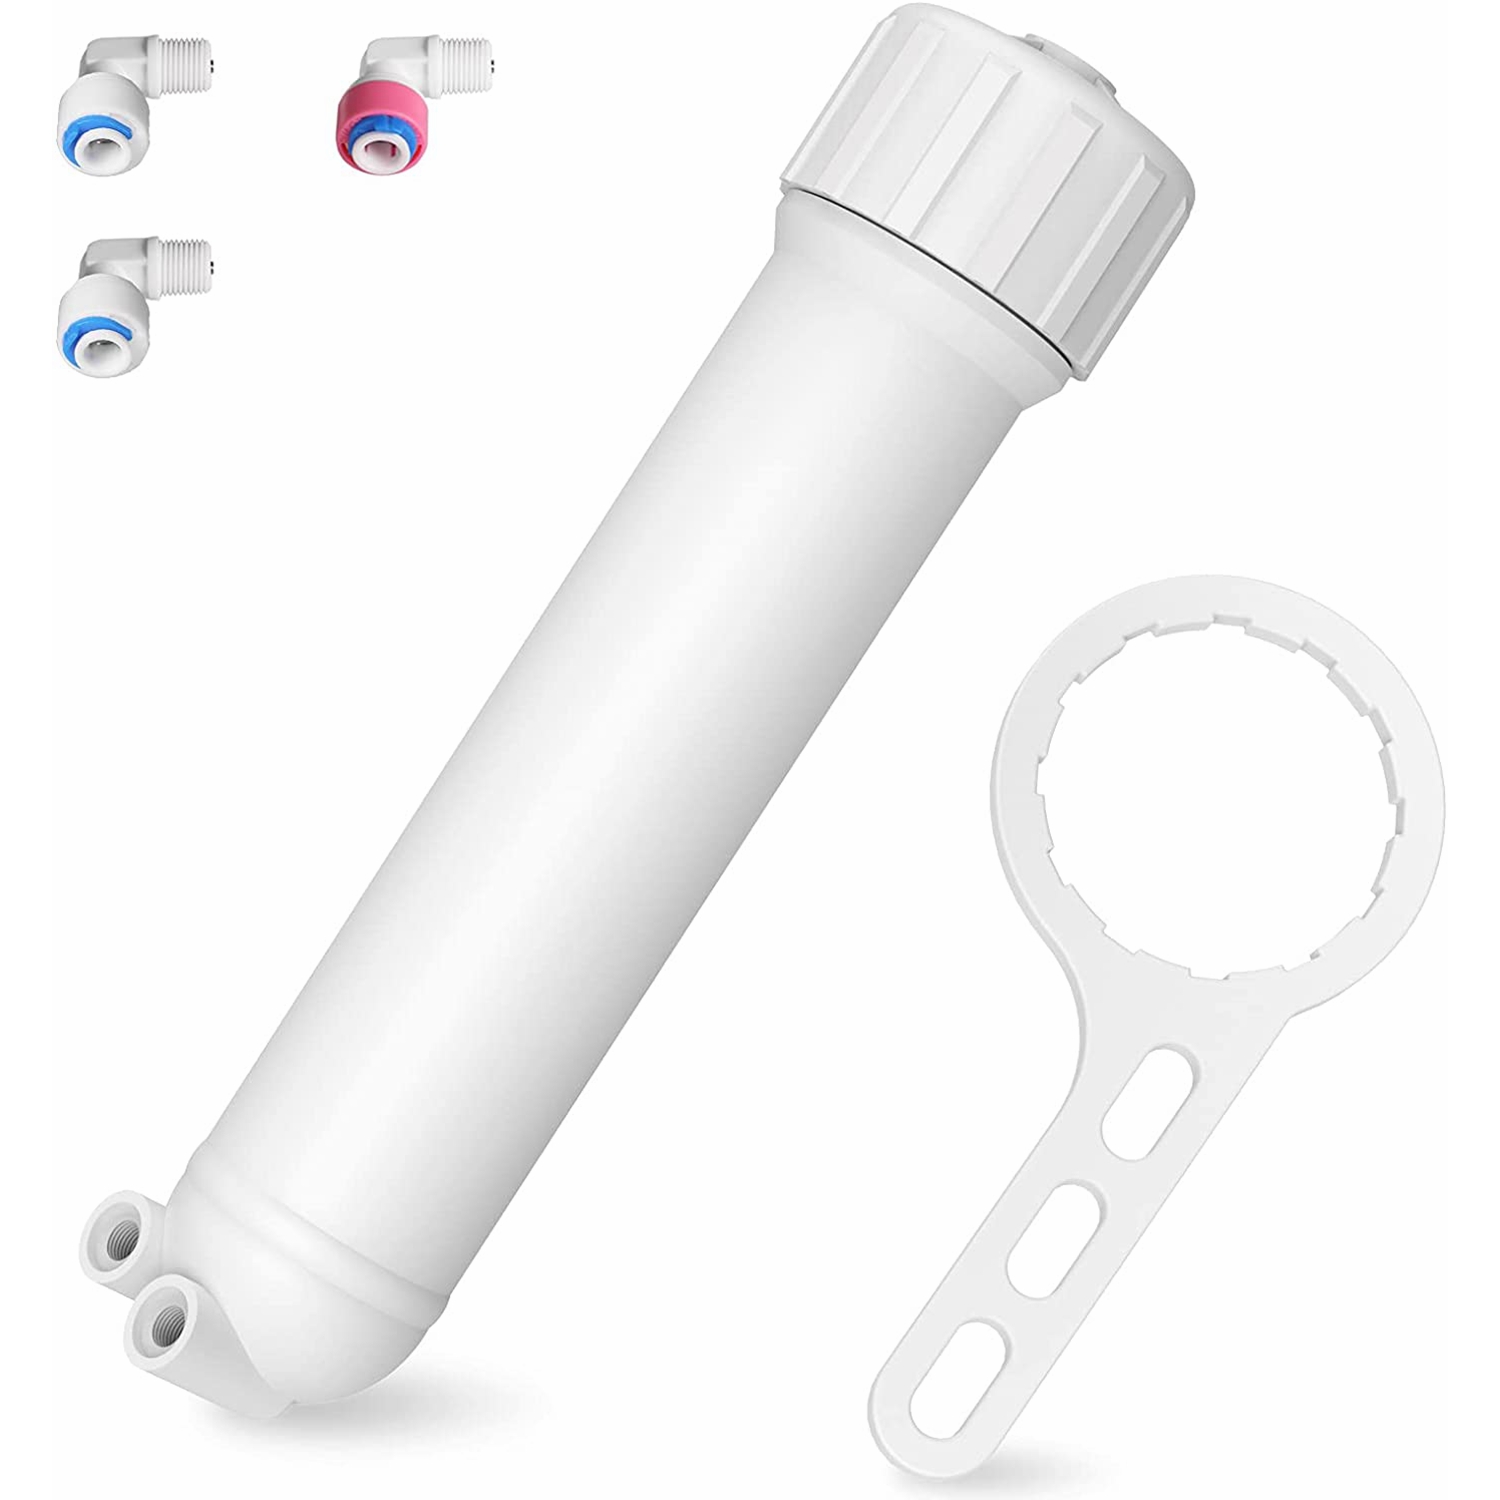 6Pack RO Reverse Osmosis Membrane 50GPD Replacement For GE FX12M 1812-50 NSF 